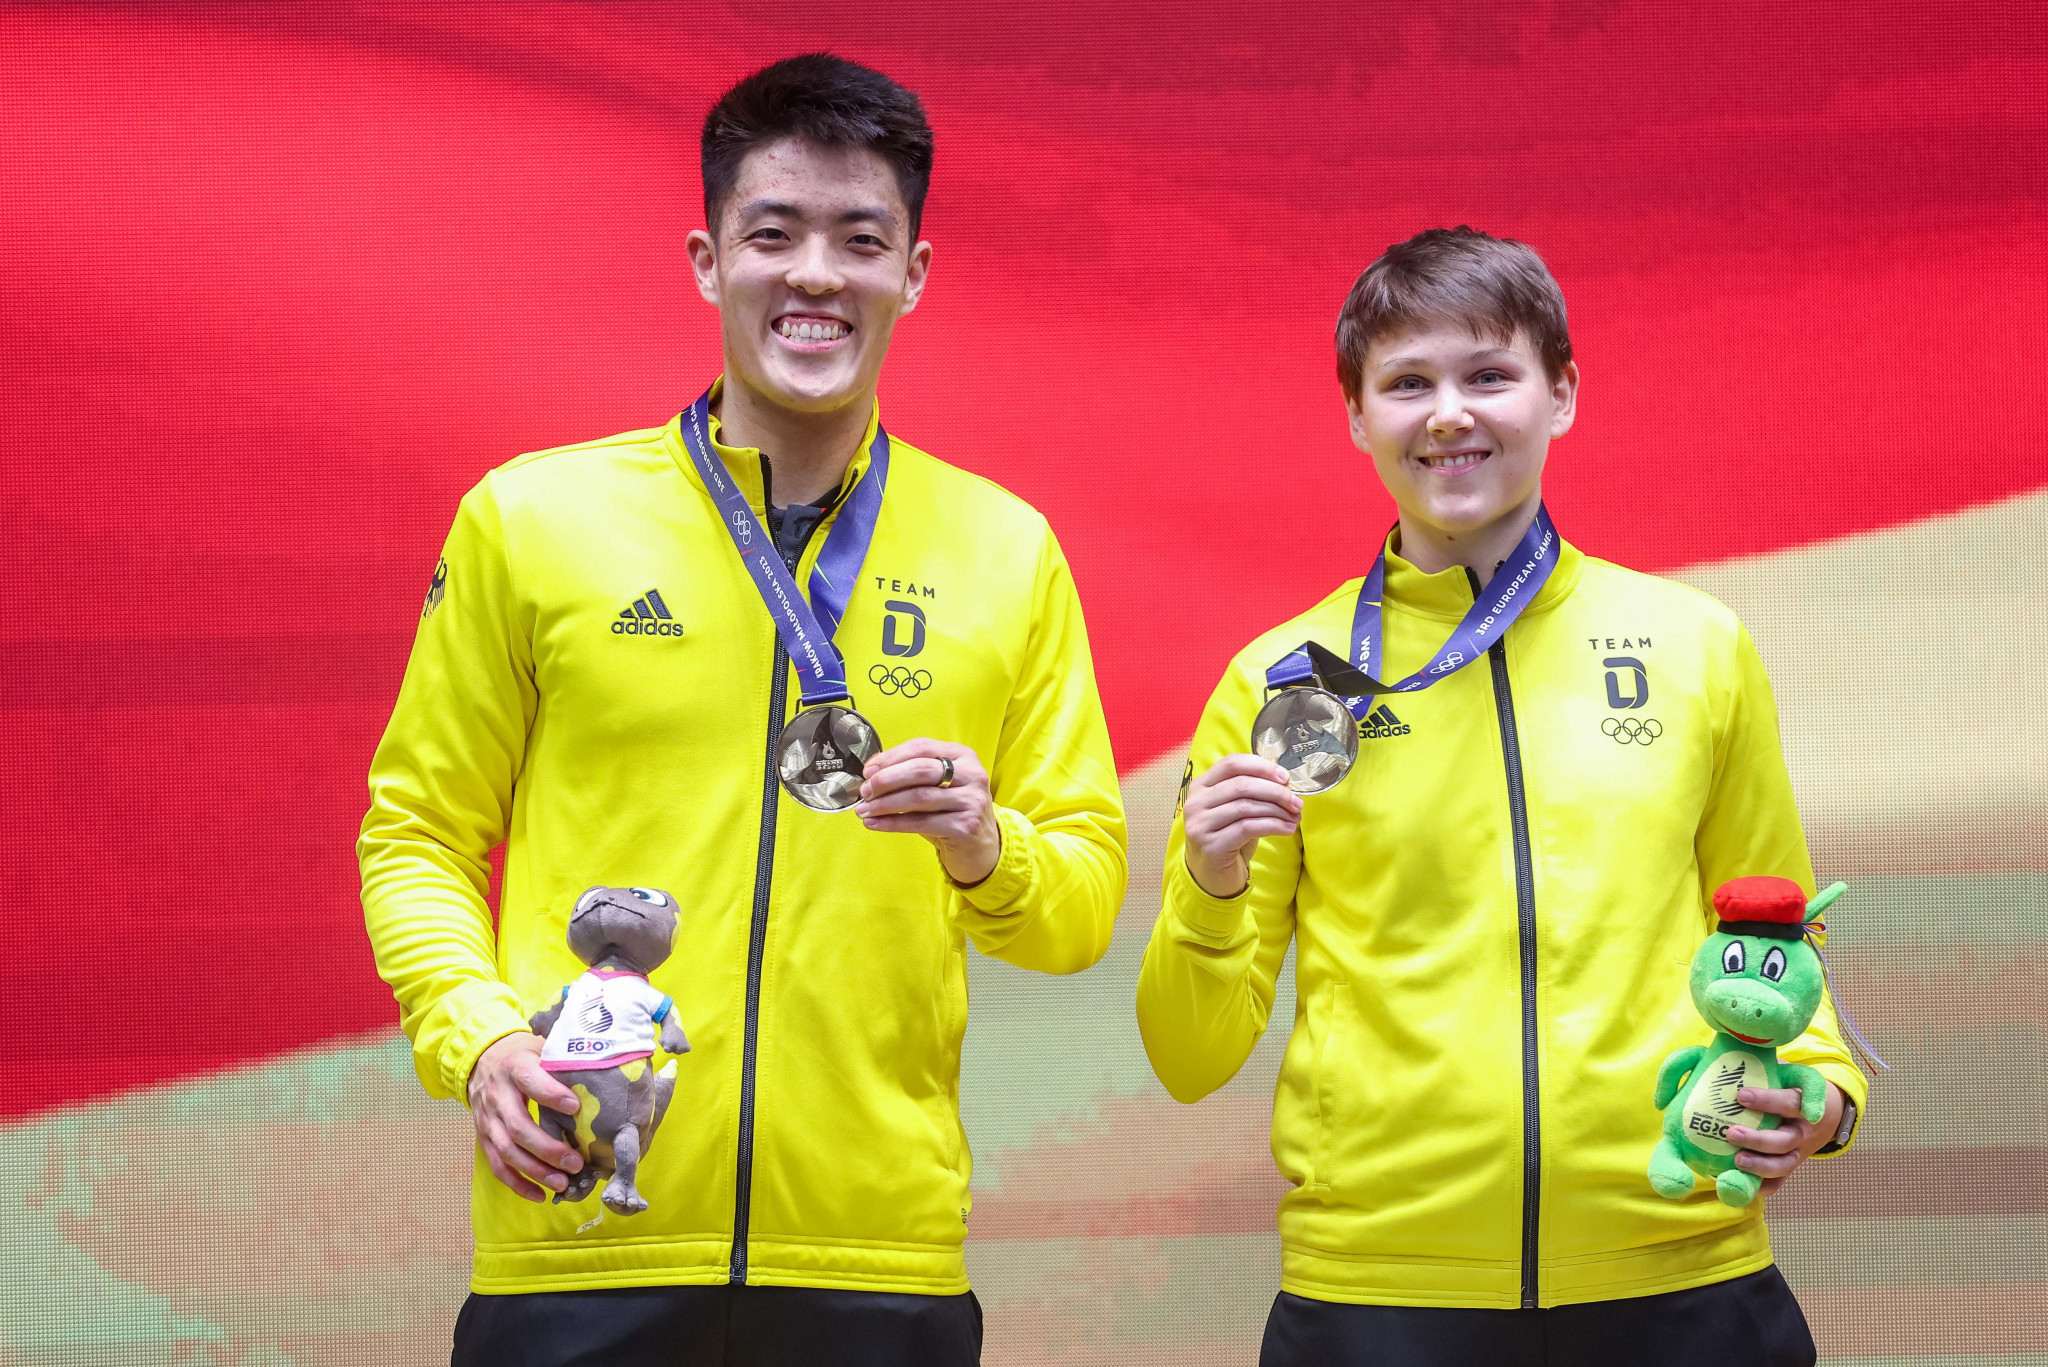 Qiu and Mittelham clinch first direct Paris 2024 qualification place at European Games